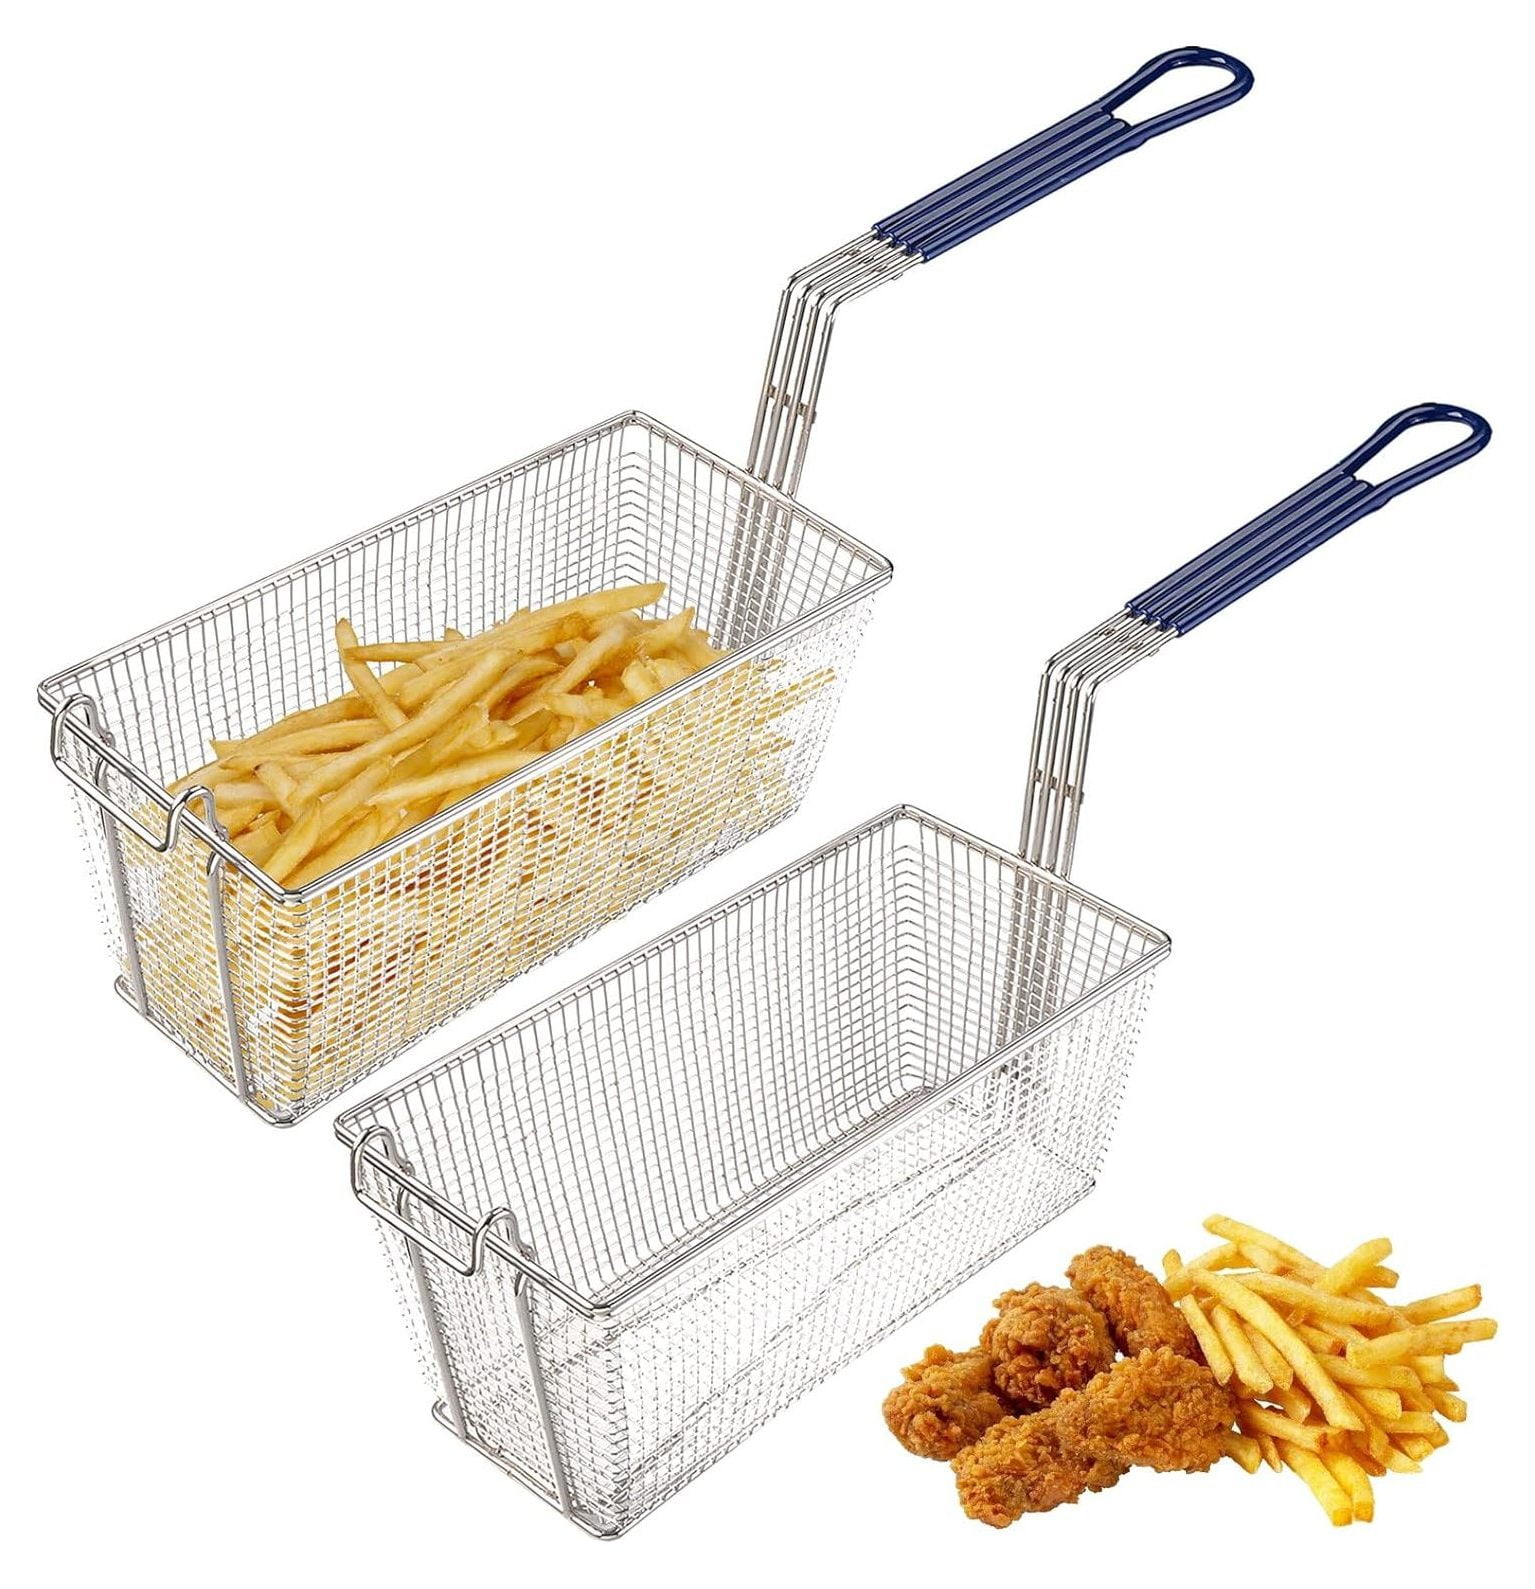 12 7/8 x 6 1/2 x 5 3/8 Fryer Basket with Front Hook